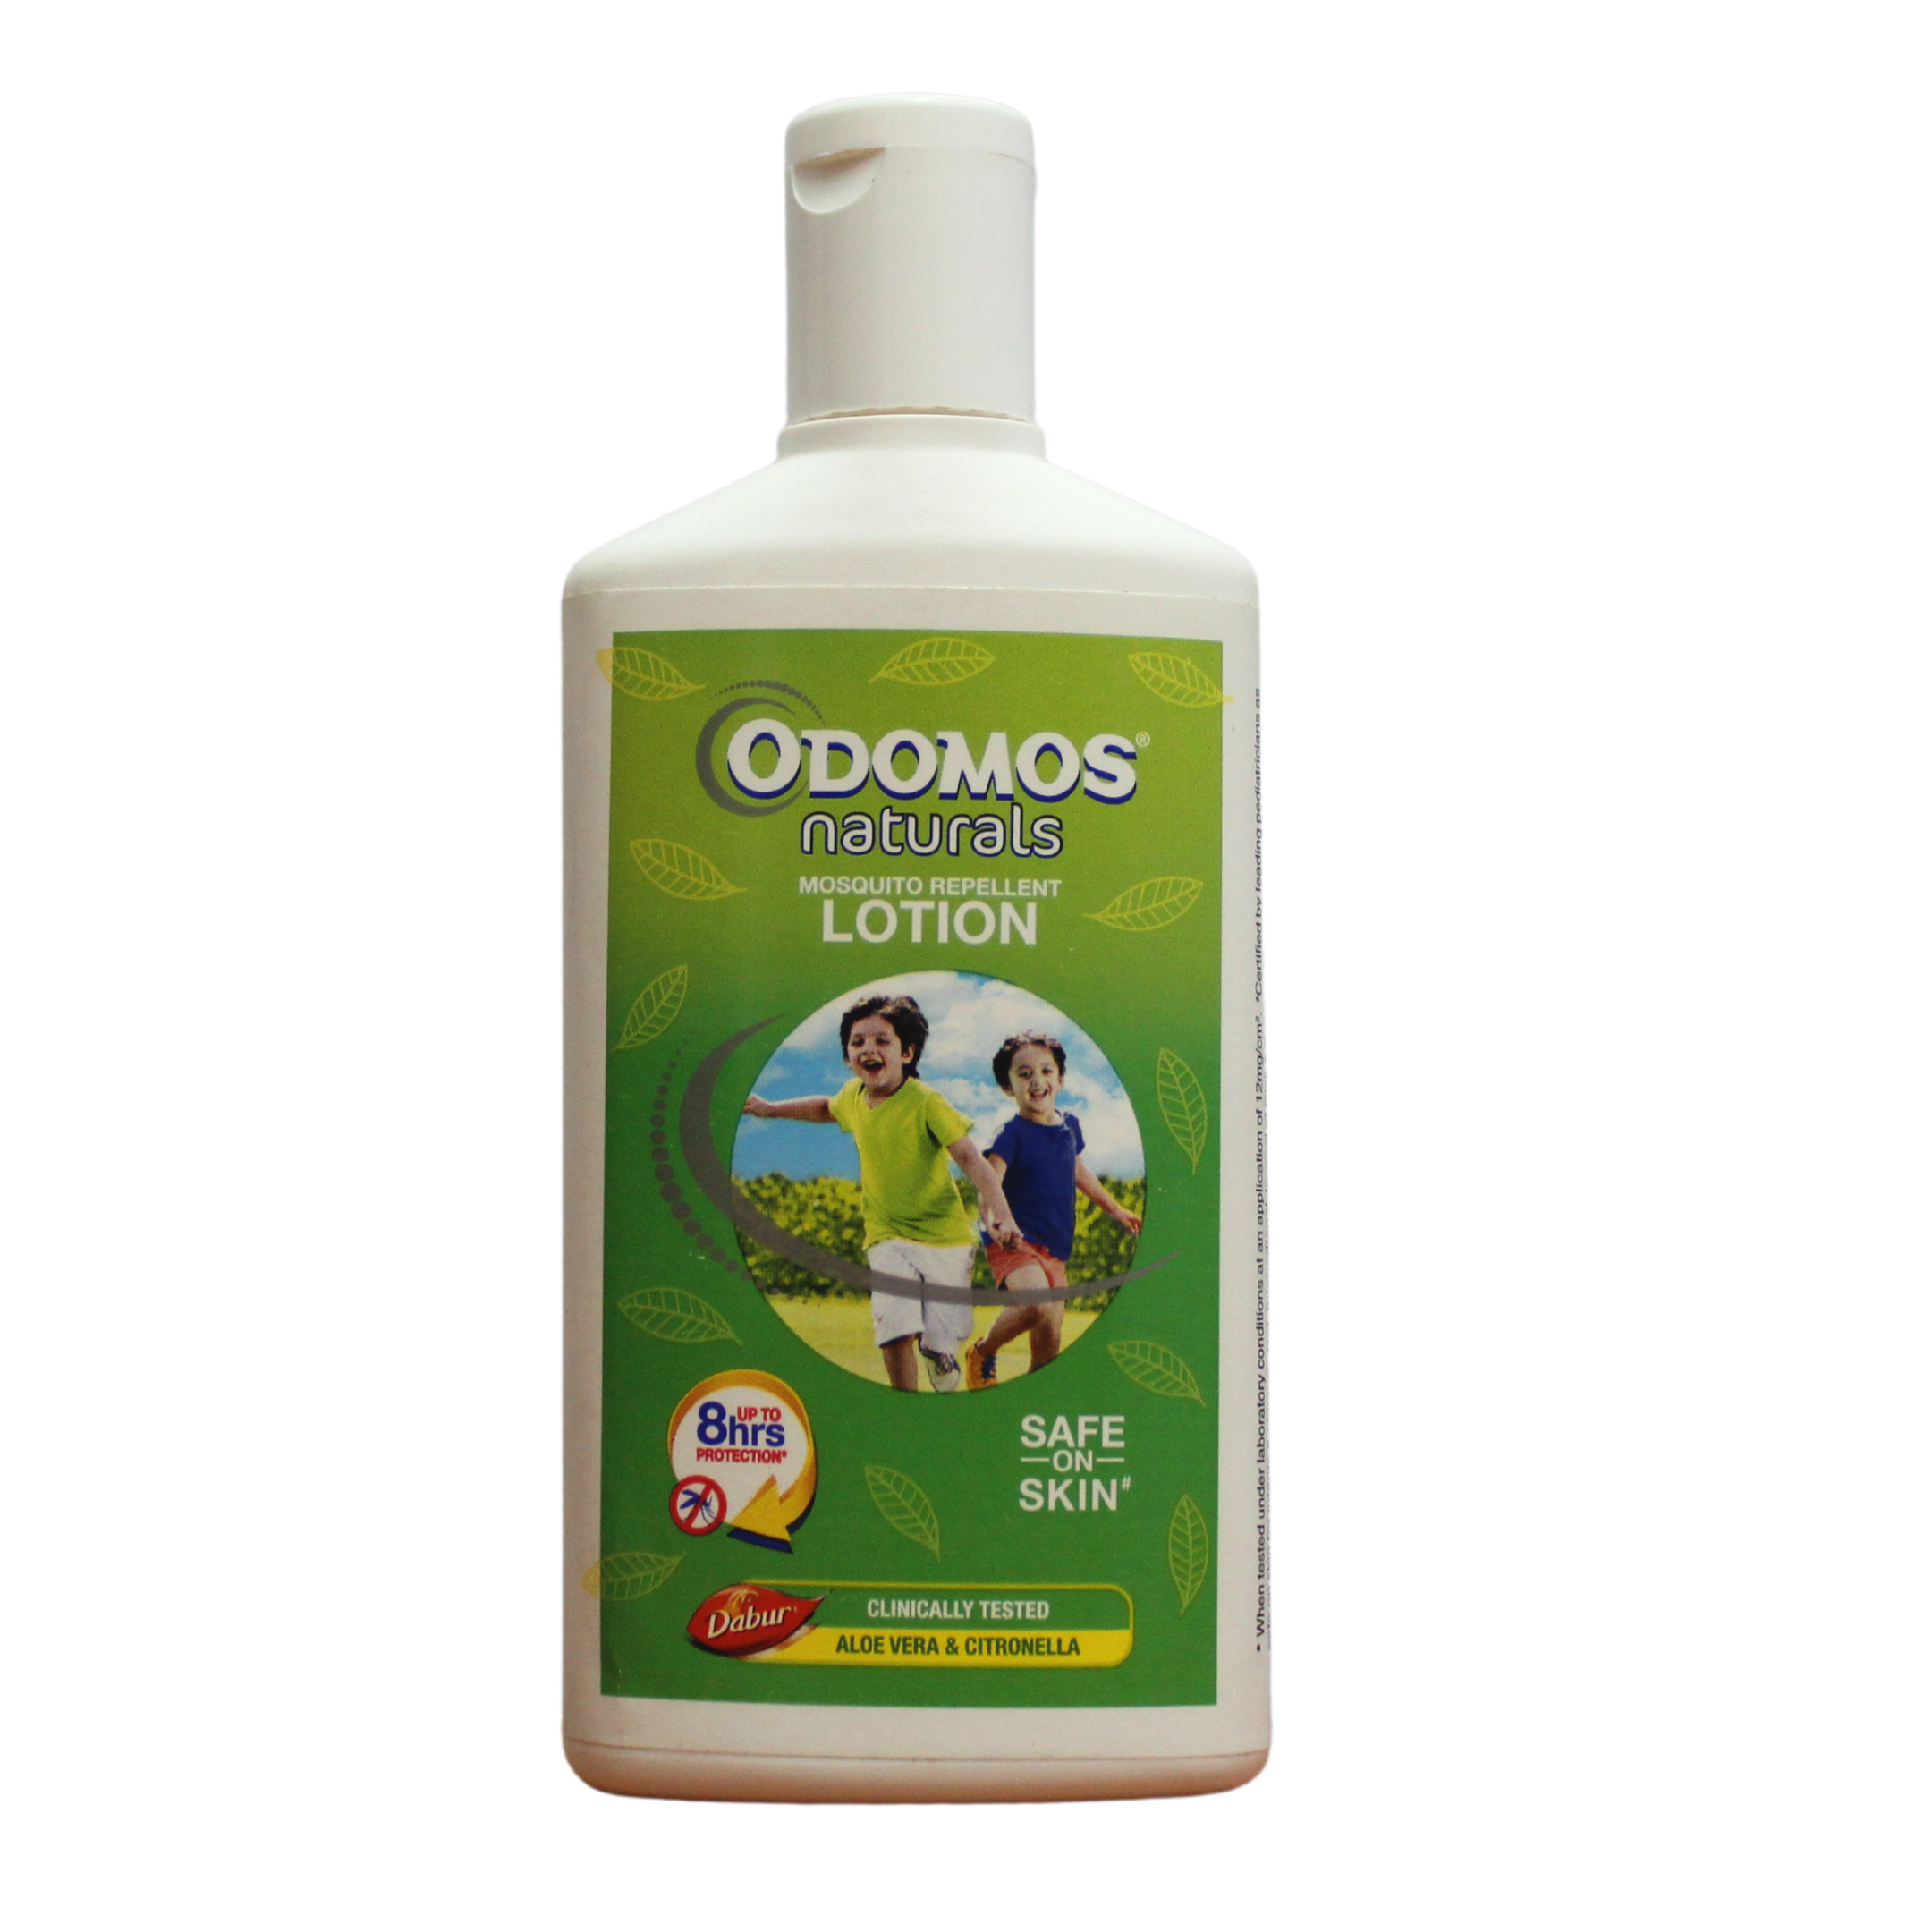 Shop Odomos Naturals - Mosquito repellent lotion at price 50.00 from Dabur Online - Ayush Care